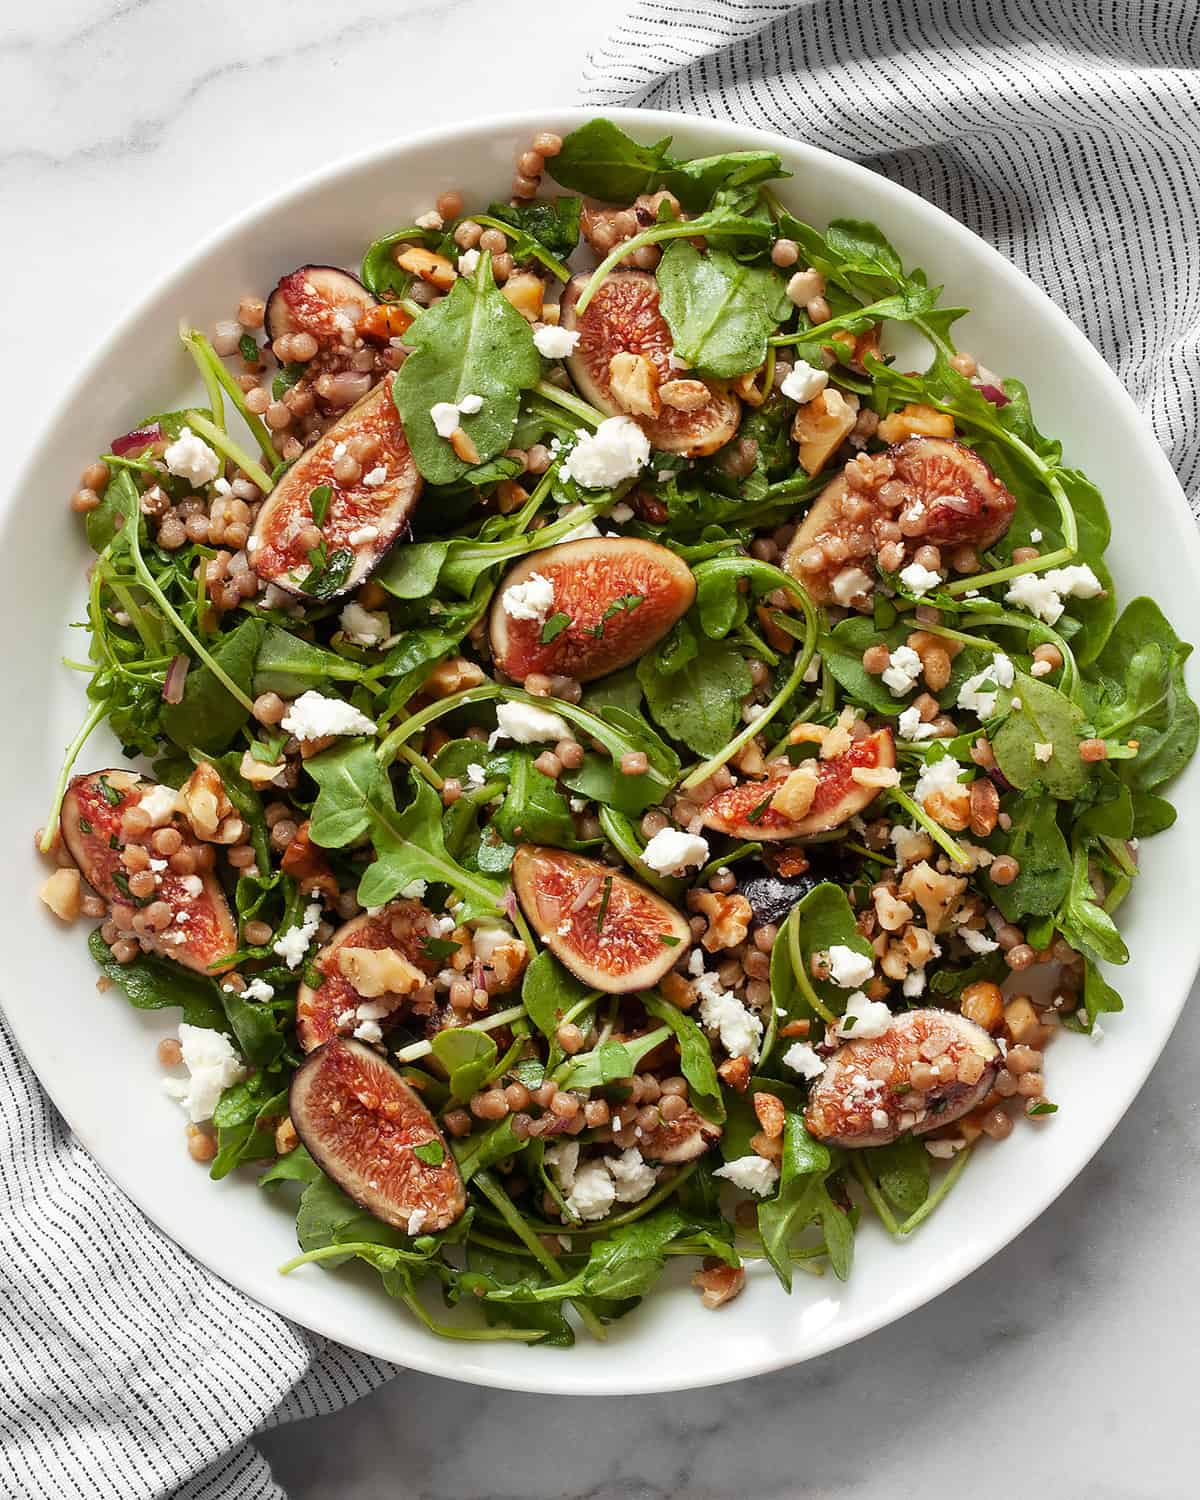 Arugula salad with figs, goat cheese and couscous on plate.